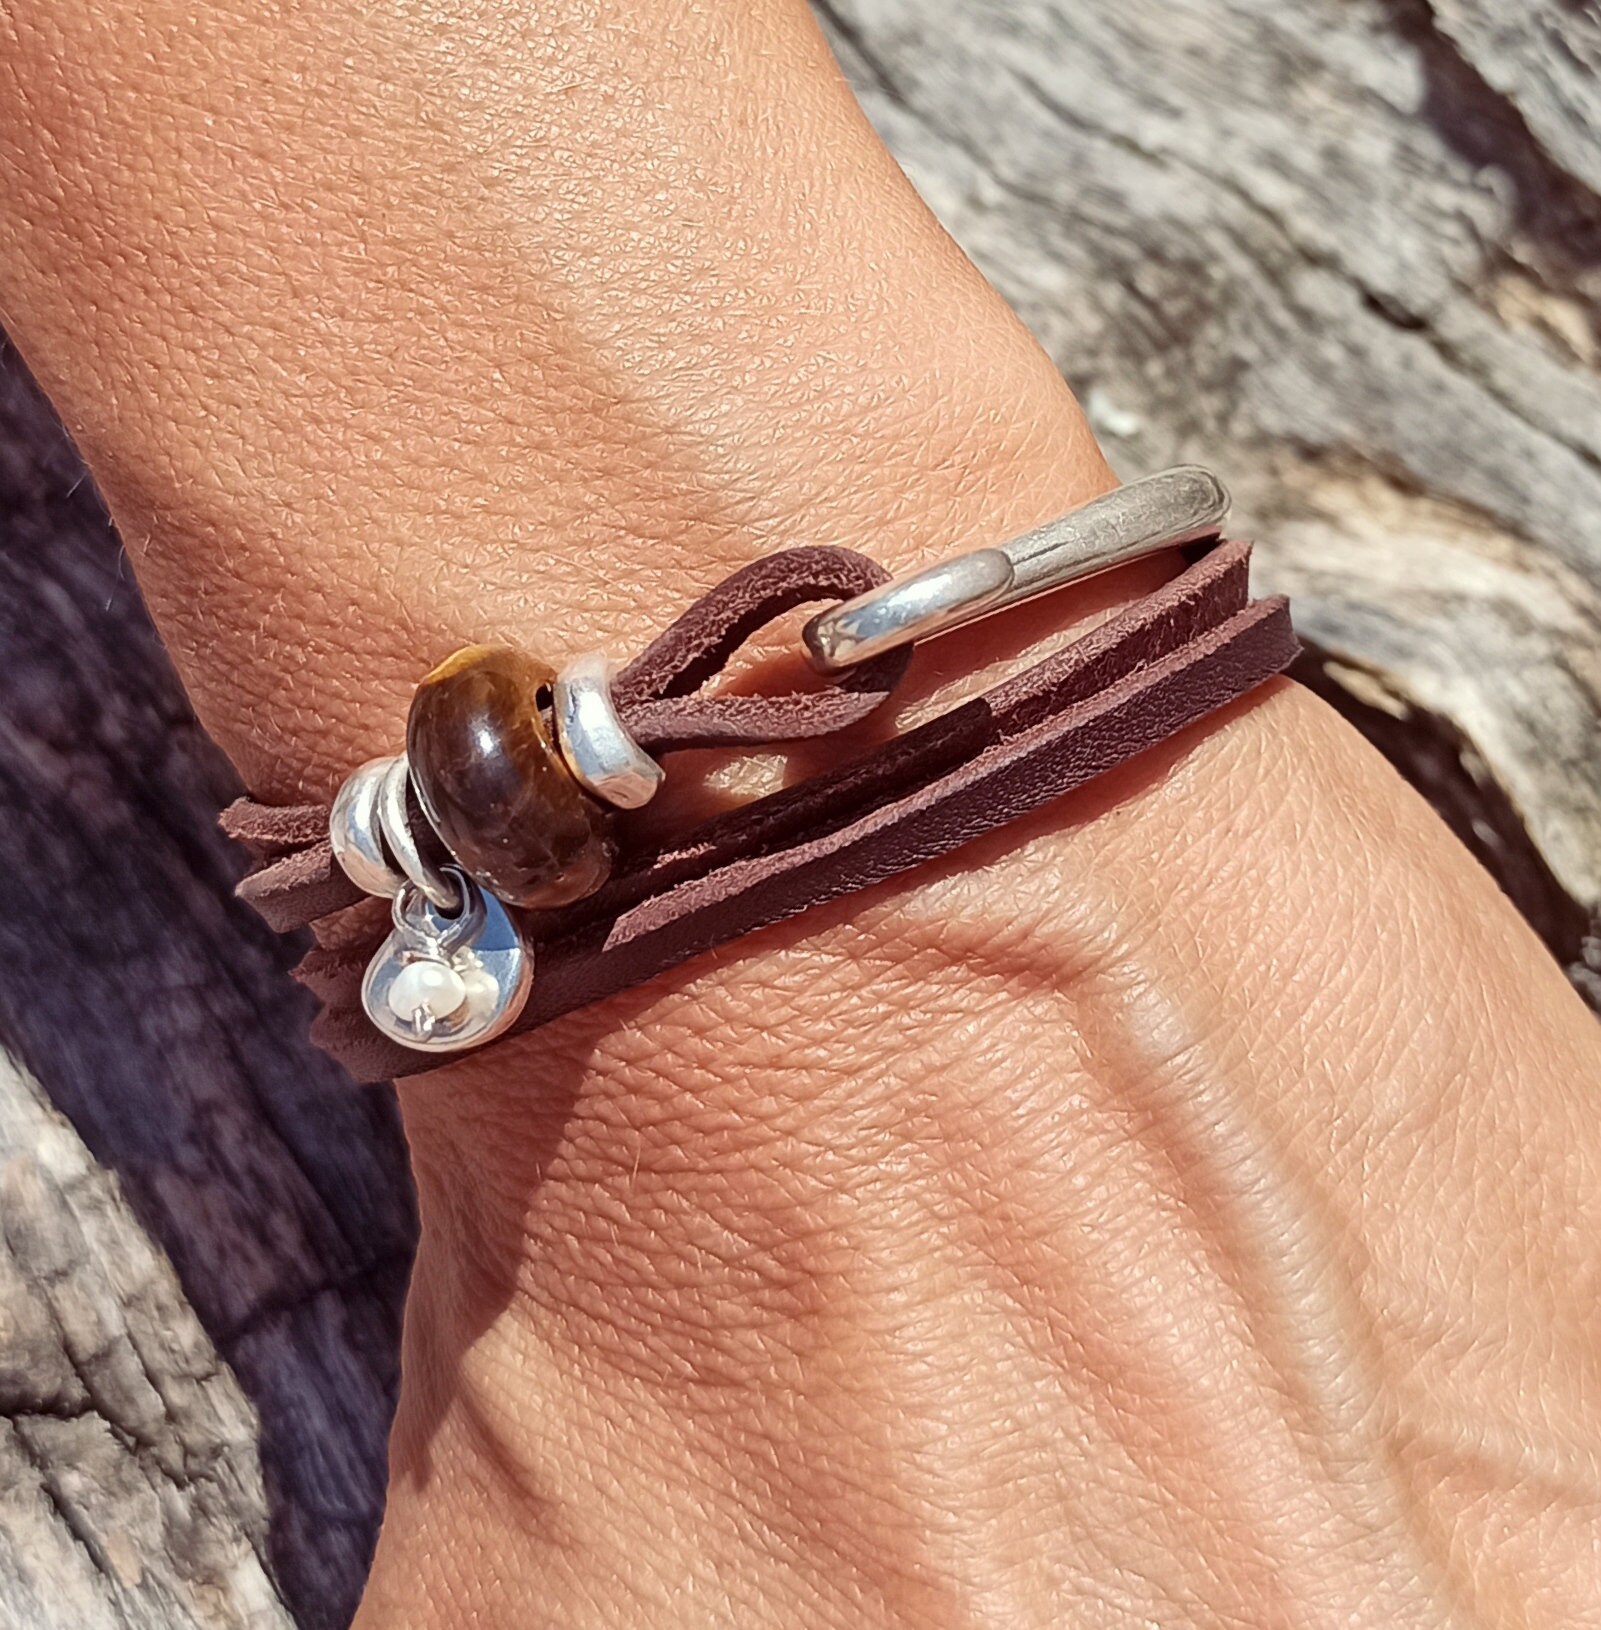 Feeling the love with the Trollbeads leather bracelet and